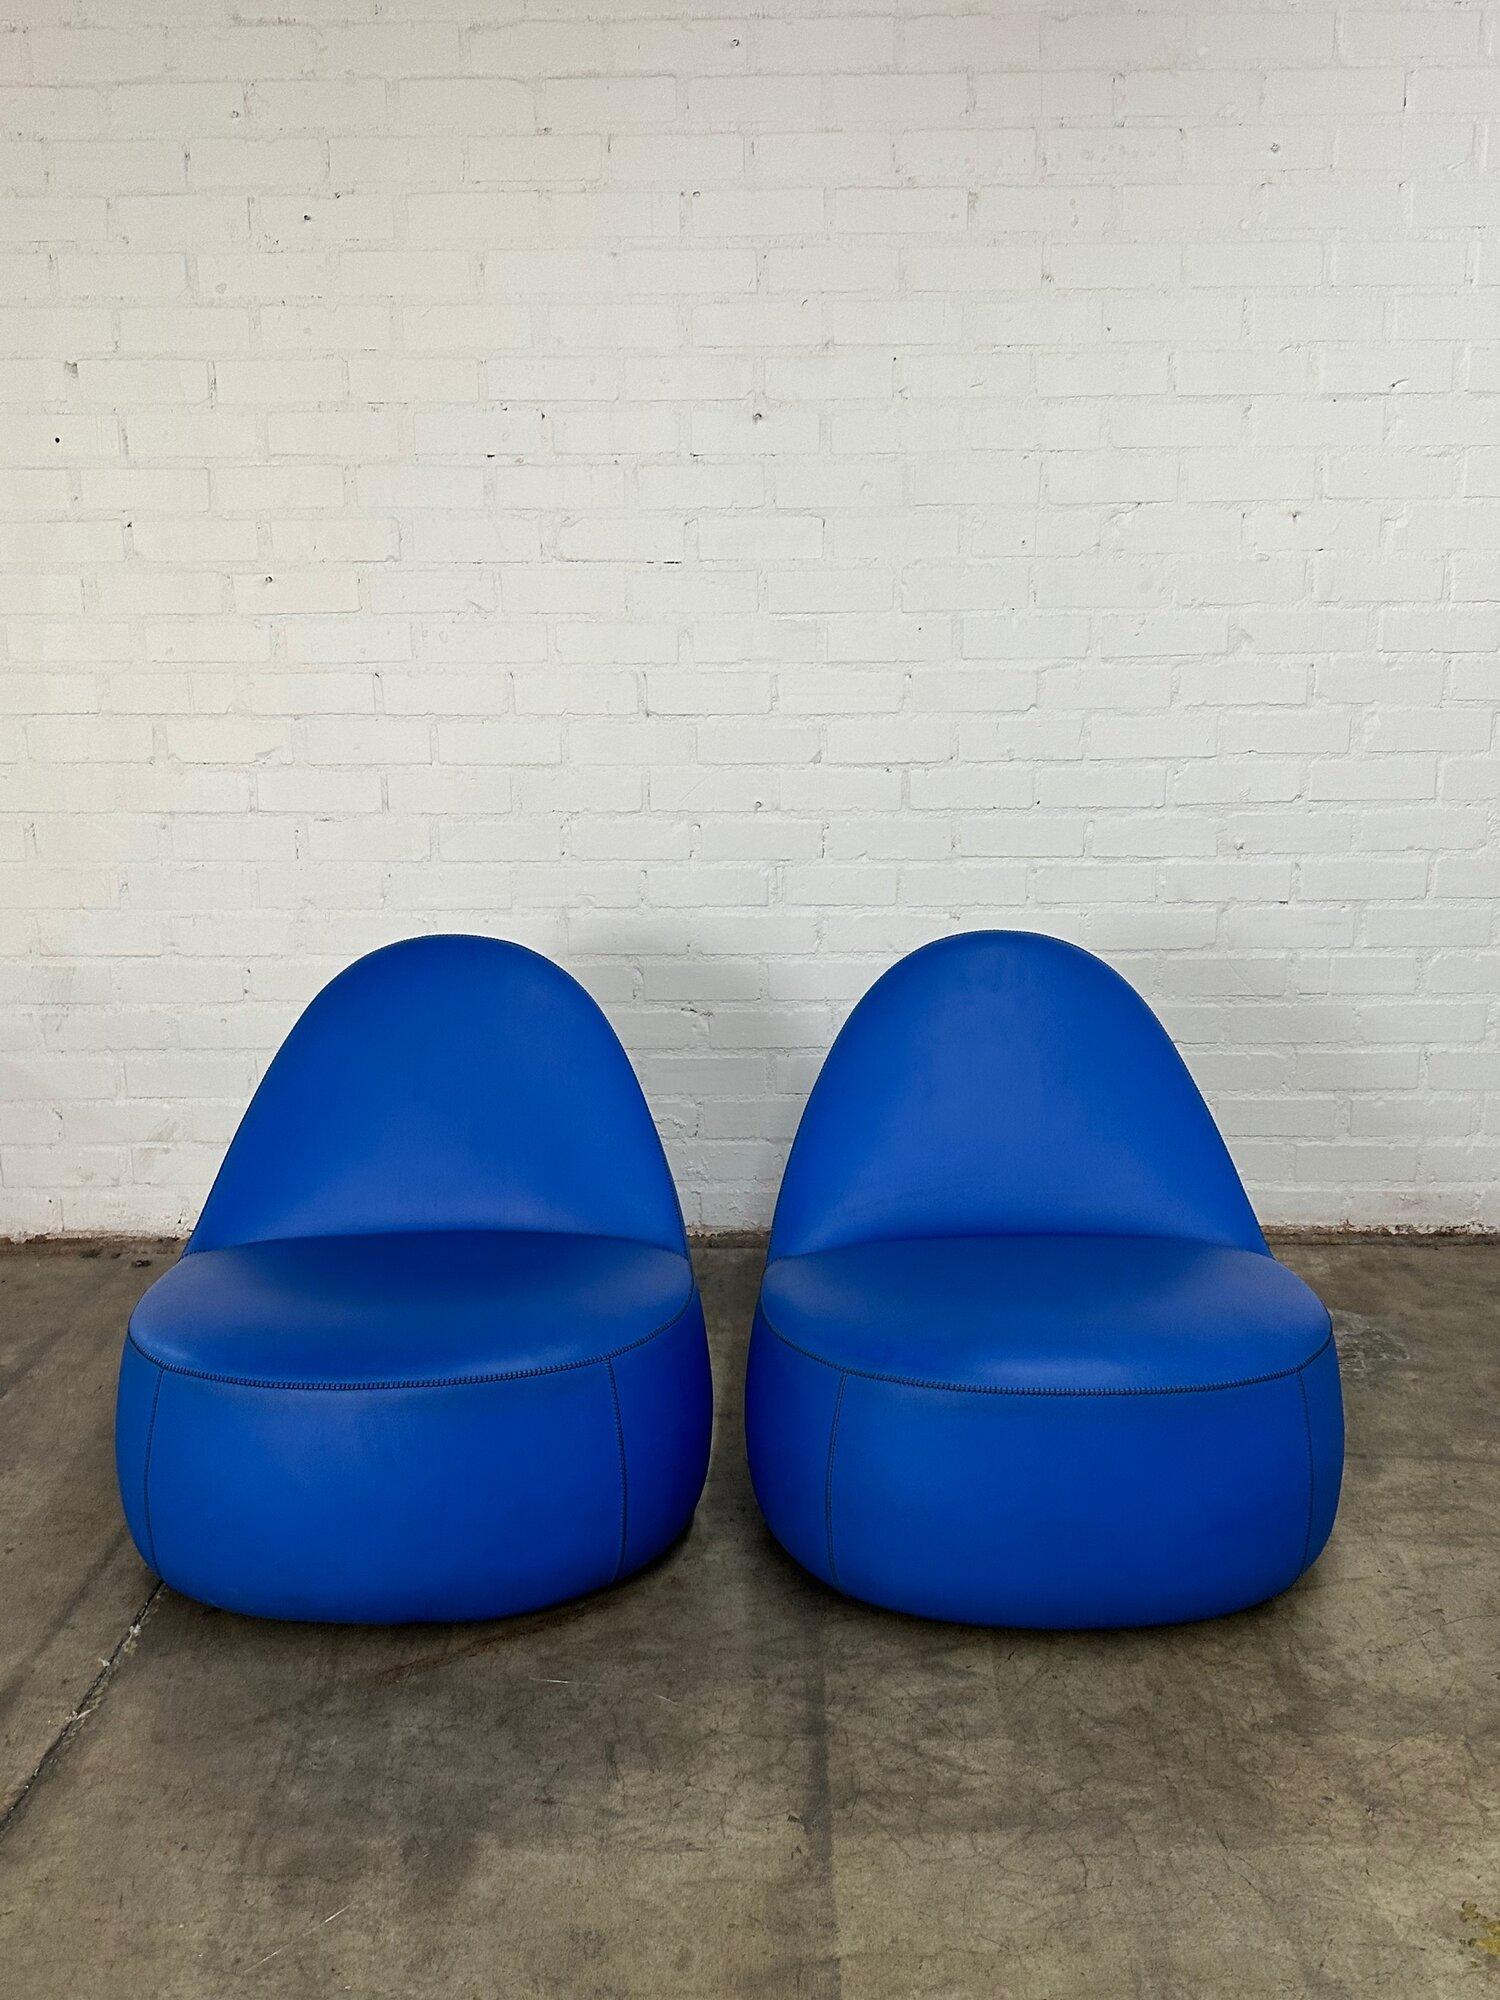 Modern Mitt Lounge Chairs in Blue with Yellow Accents by Claudia + Harry Washington, Be For Sale